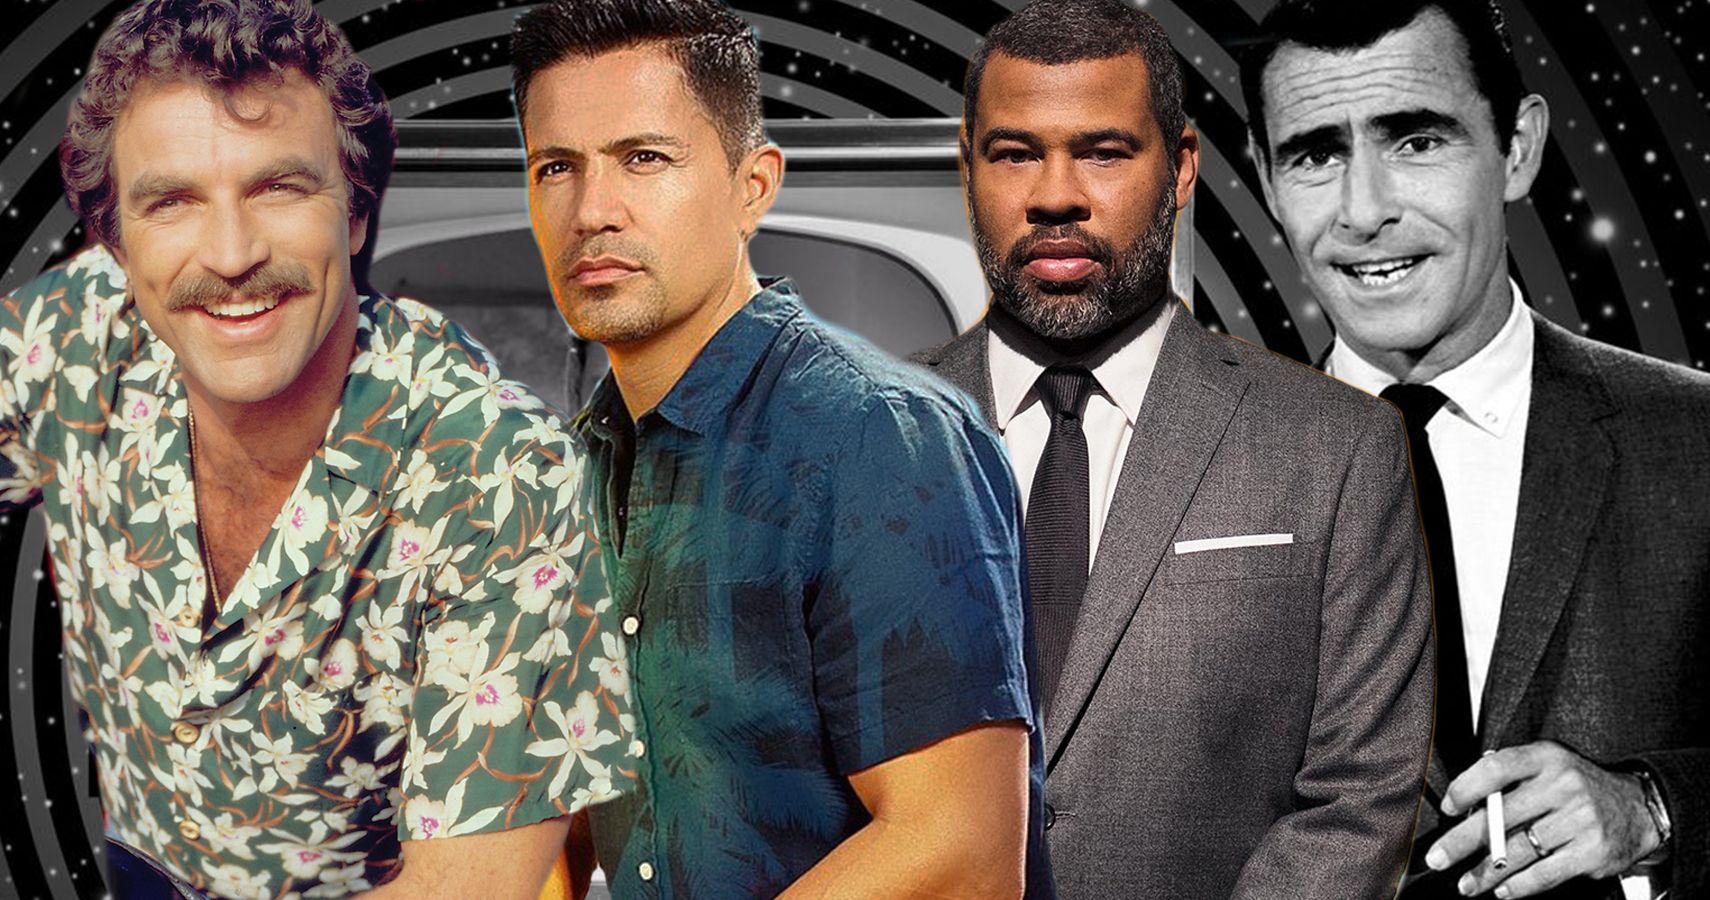 Magnum P.I. and The Twilight Zone Tv show reboots